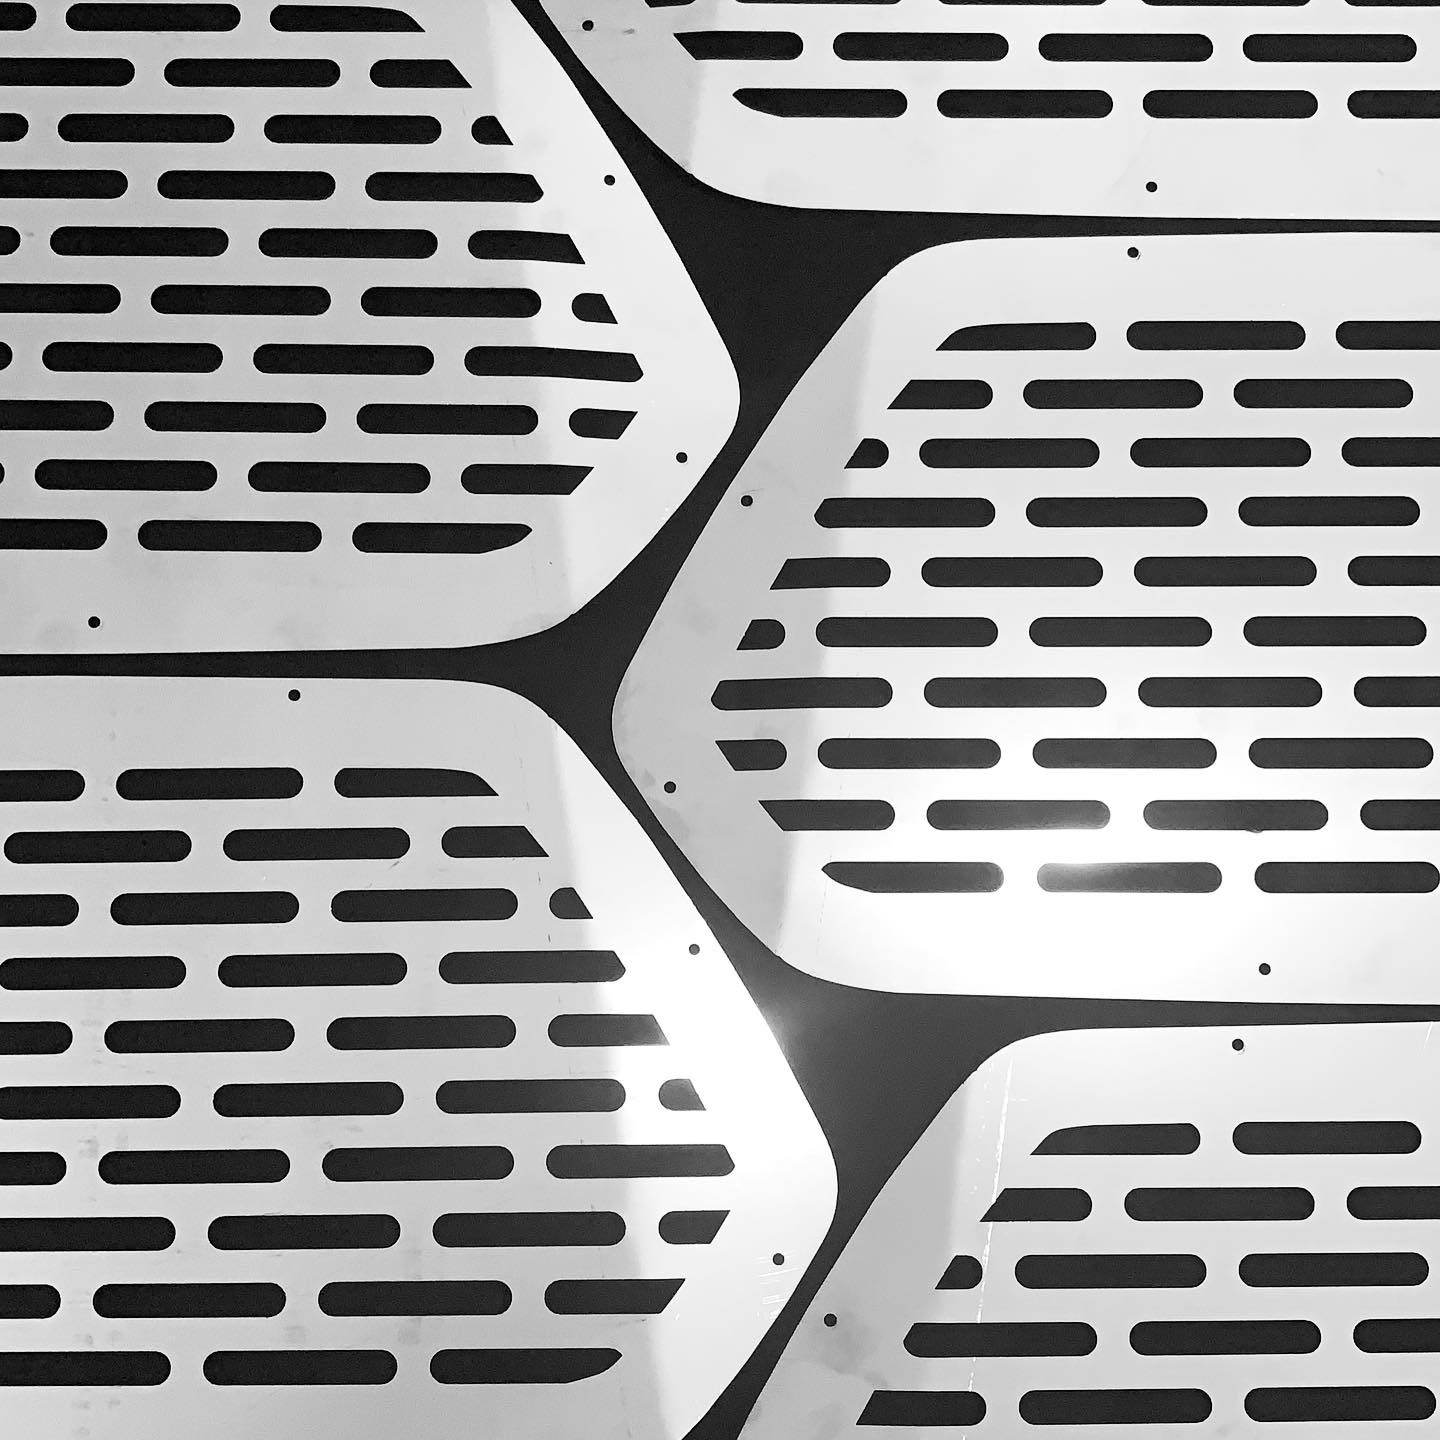 Get a Sneak Peek: Raw Stainless Steel Tacoma Grilles Ready for Powder Coating